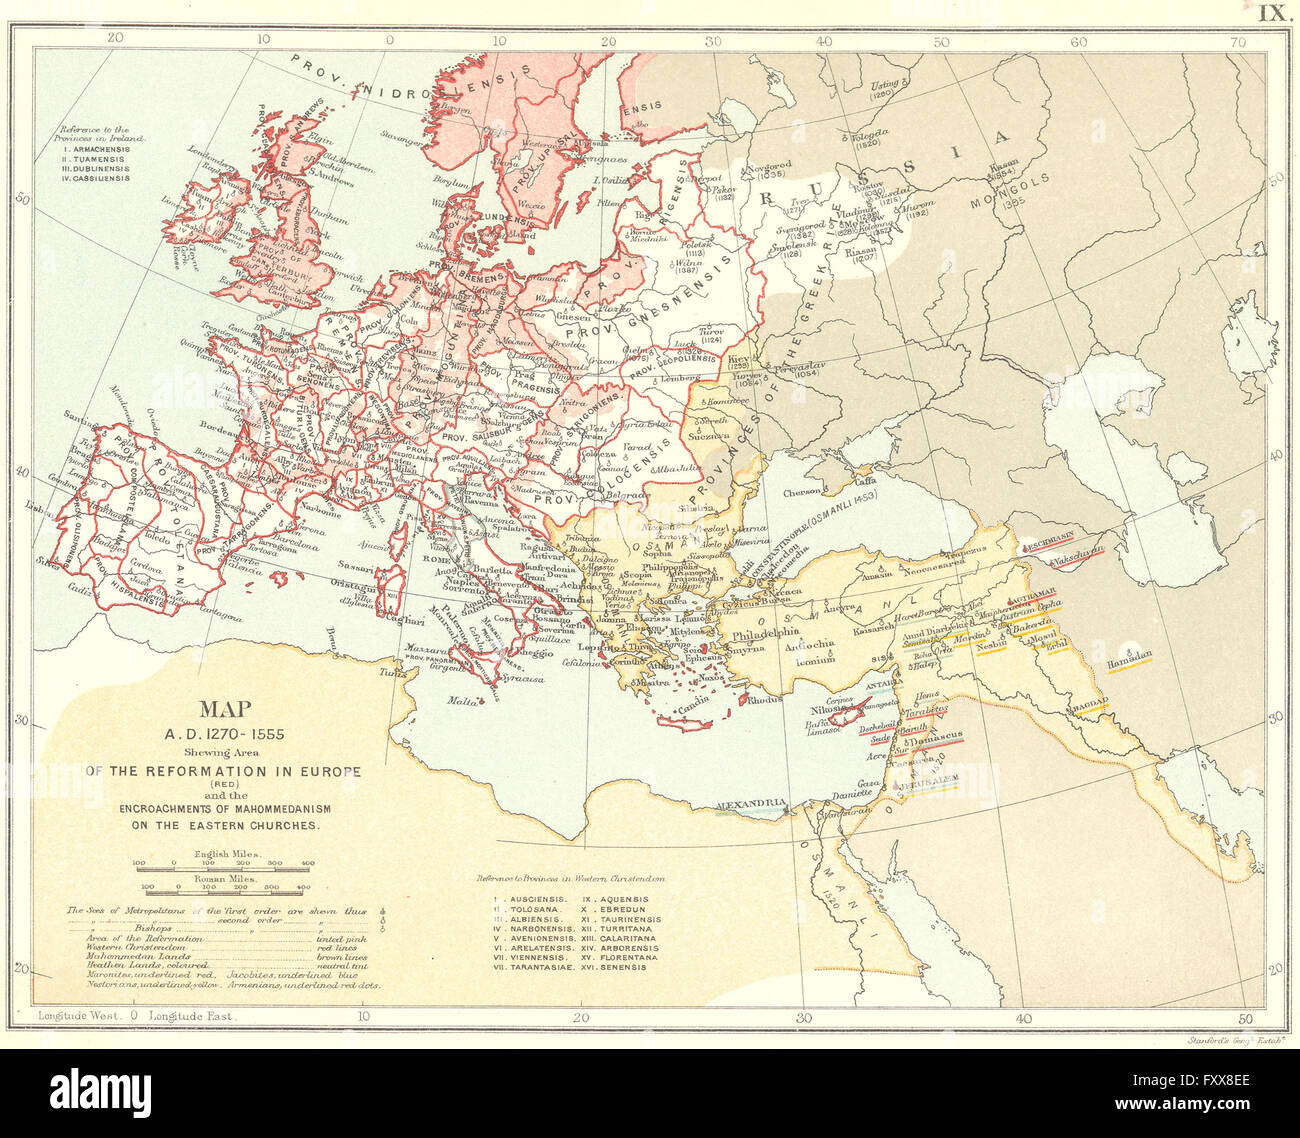 PROTESTANT REFORMATION: Europe 1270-1555. Encroachments of Islam, 1897 old map Stock Photo